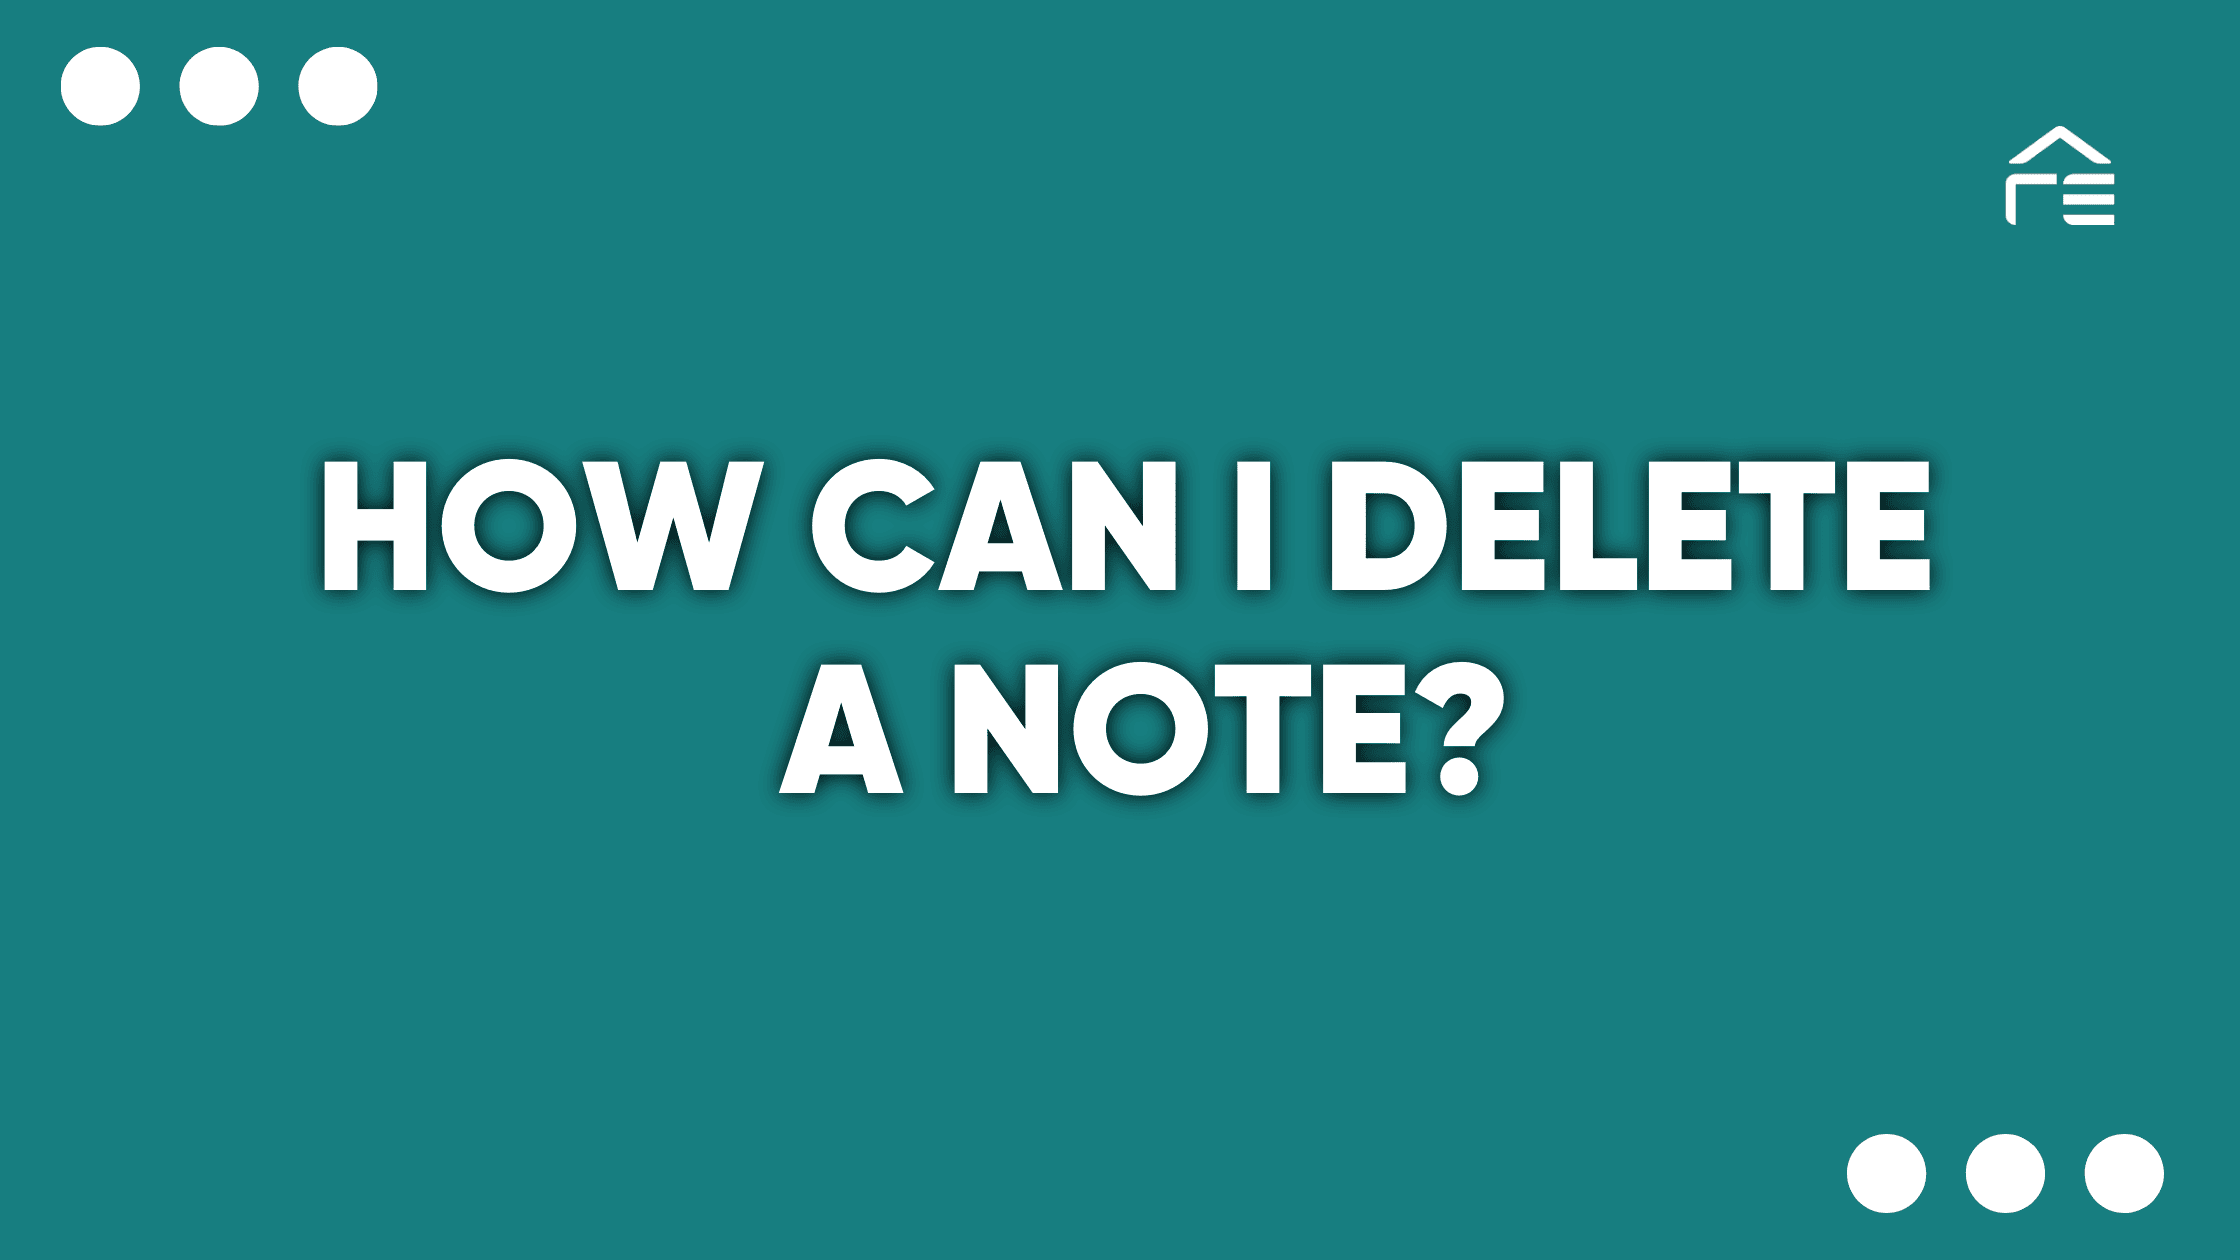 How Can I Delete a Note?